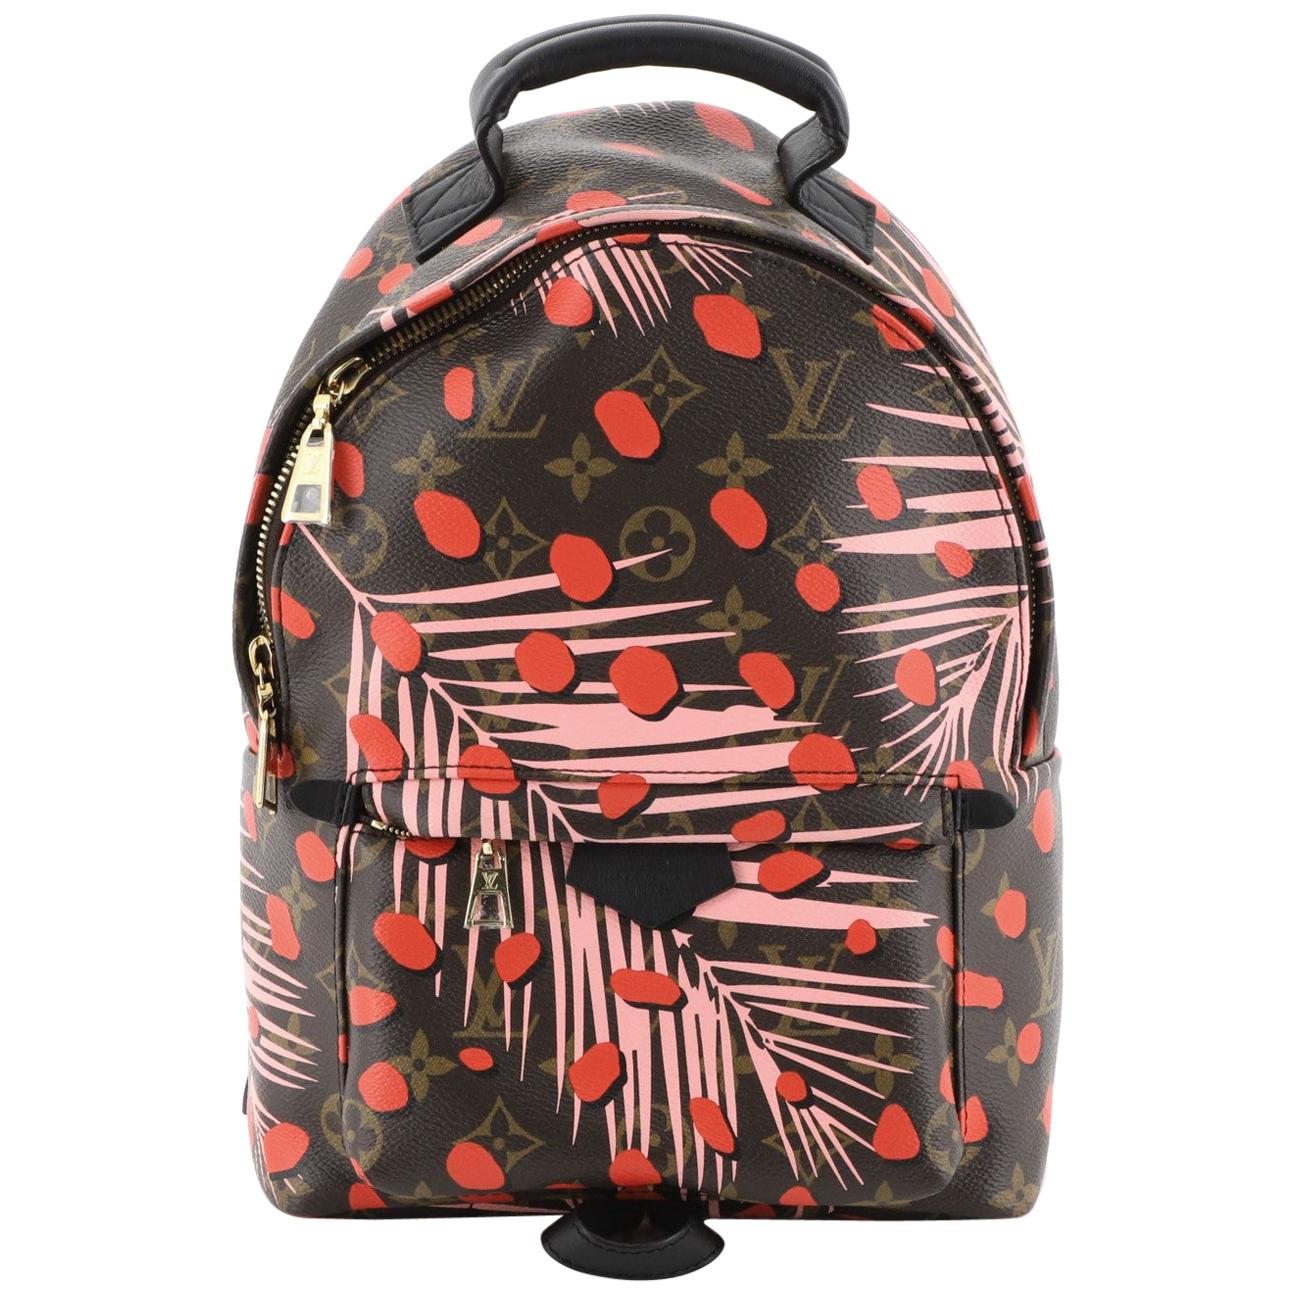 Louis Vuitton Palm Springs Backpack Limited Edition Monogram Jungle Dots PM